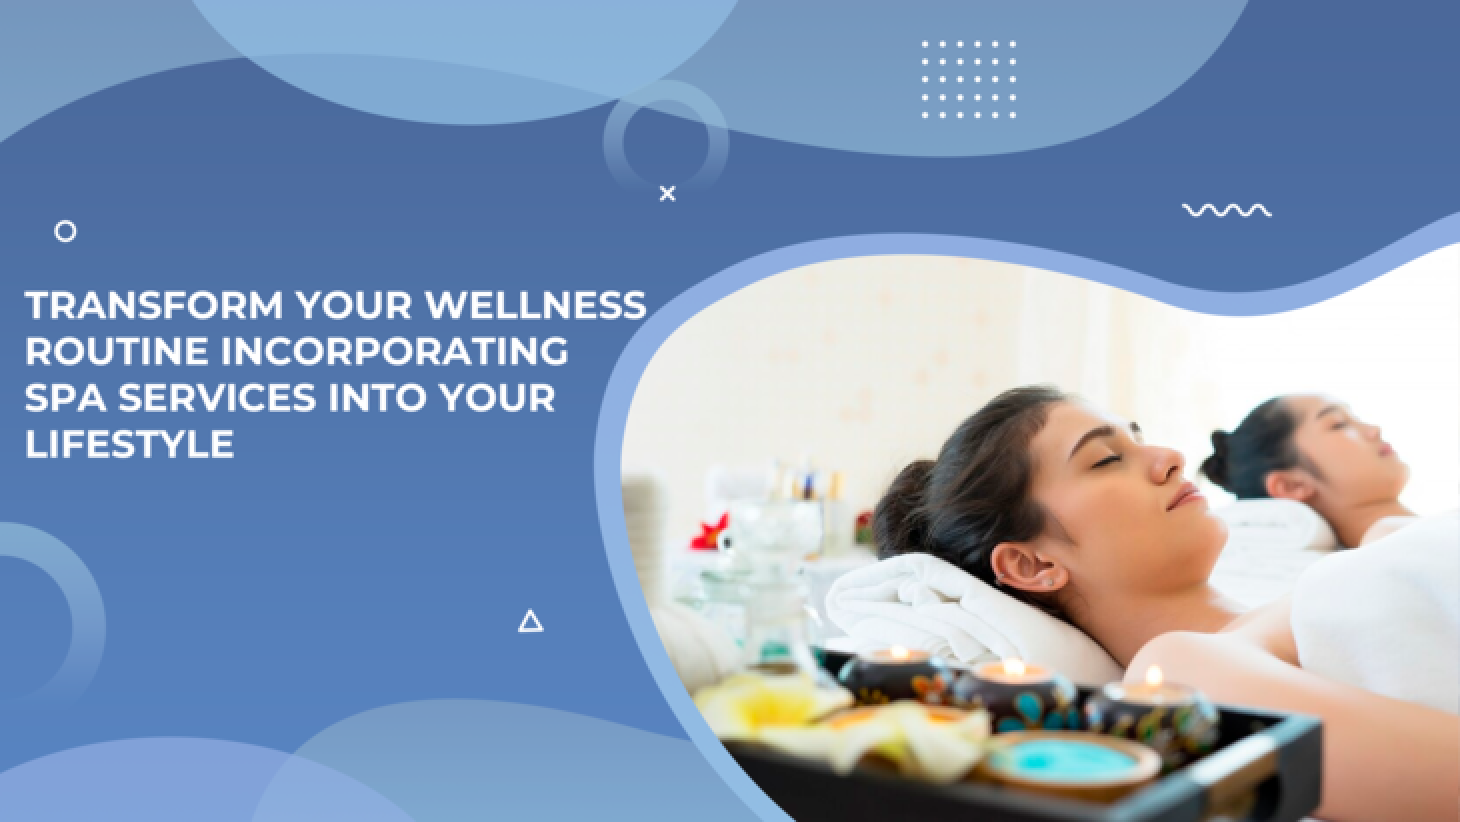 Transform Your Wellness Routine Incorporating Spa Services into Your Lifestyle